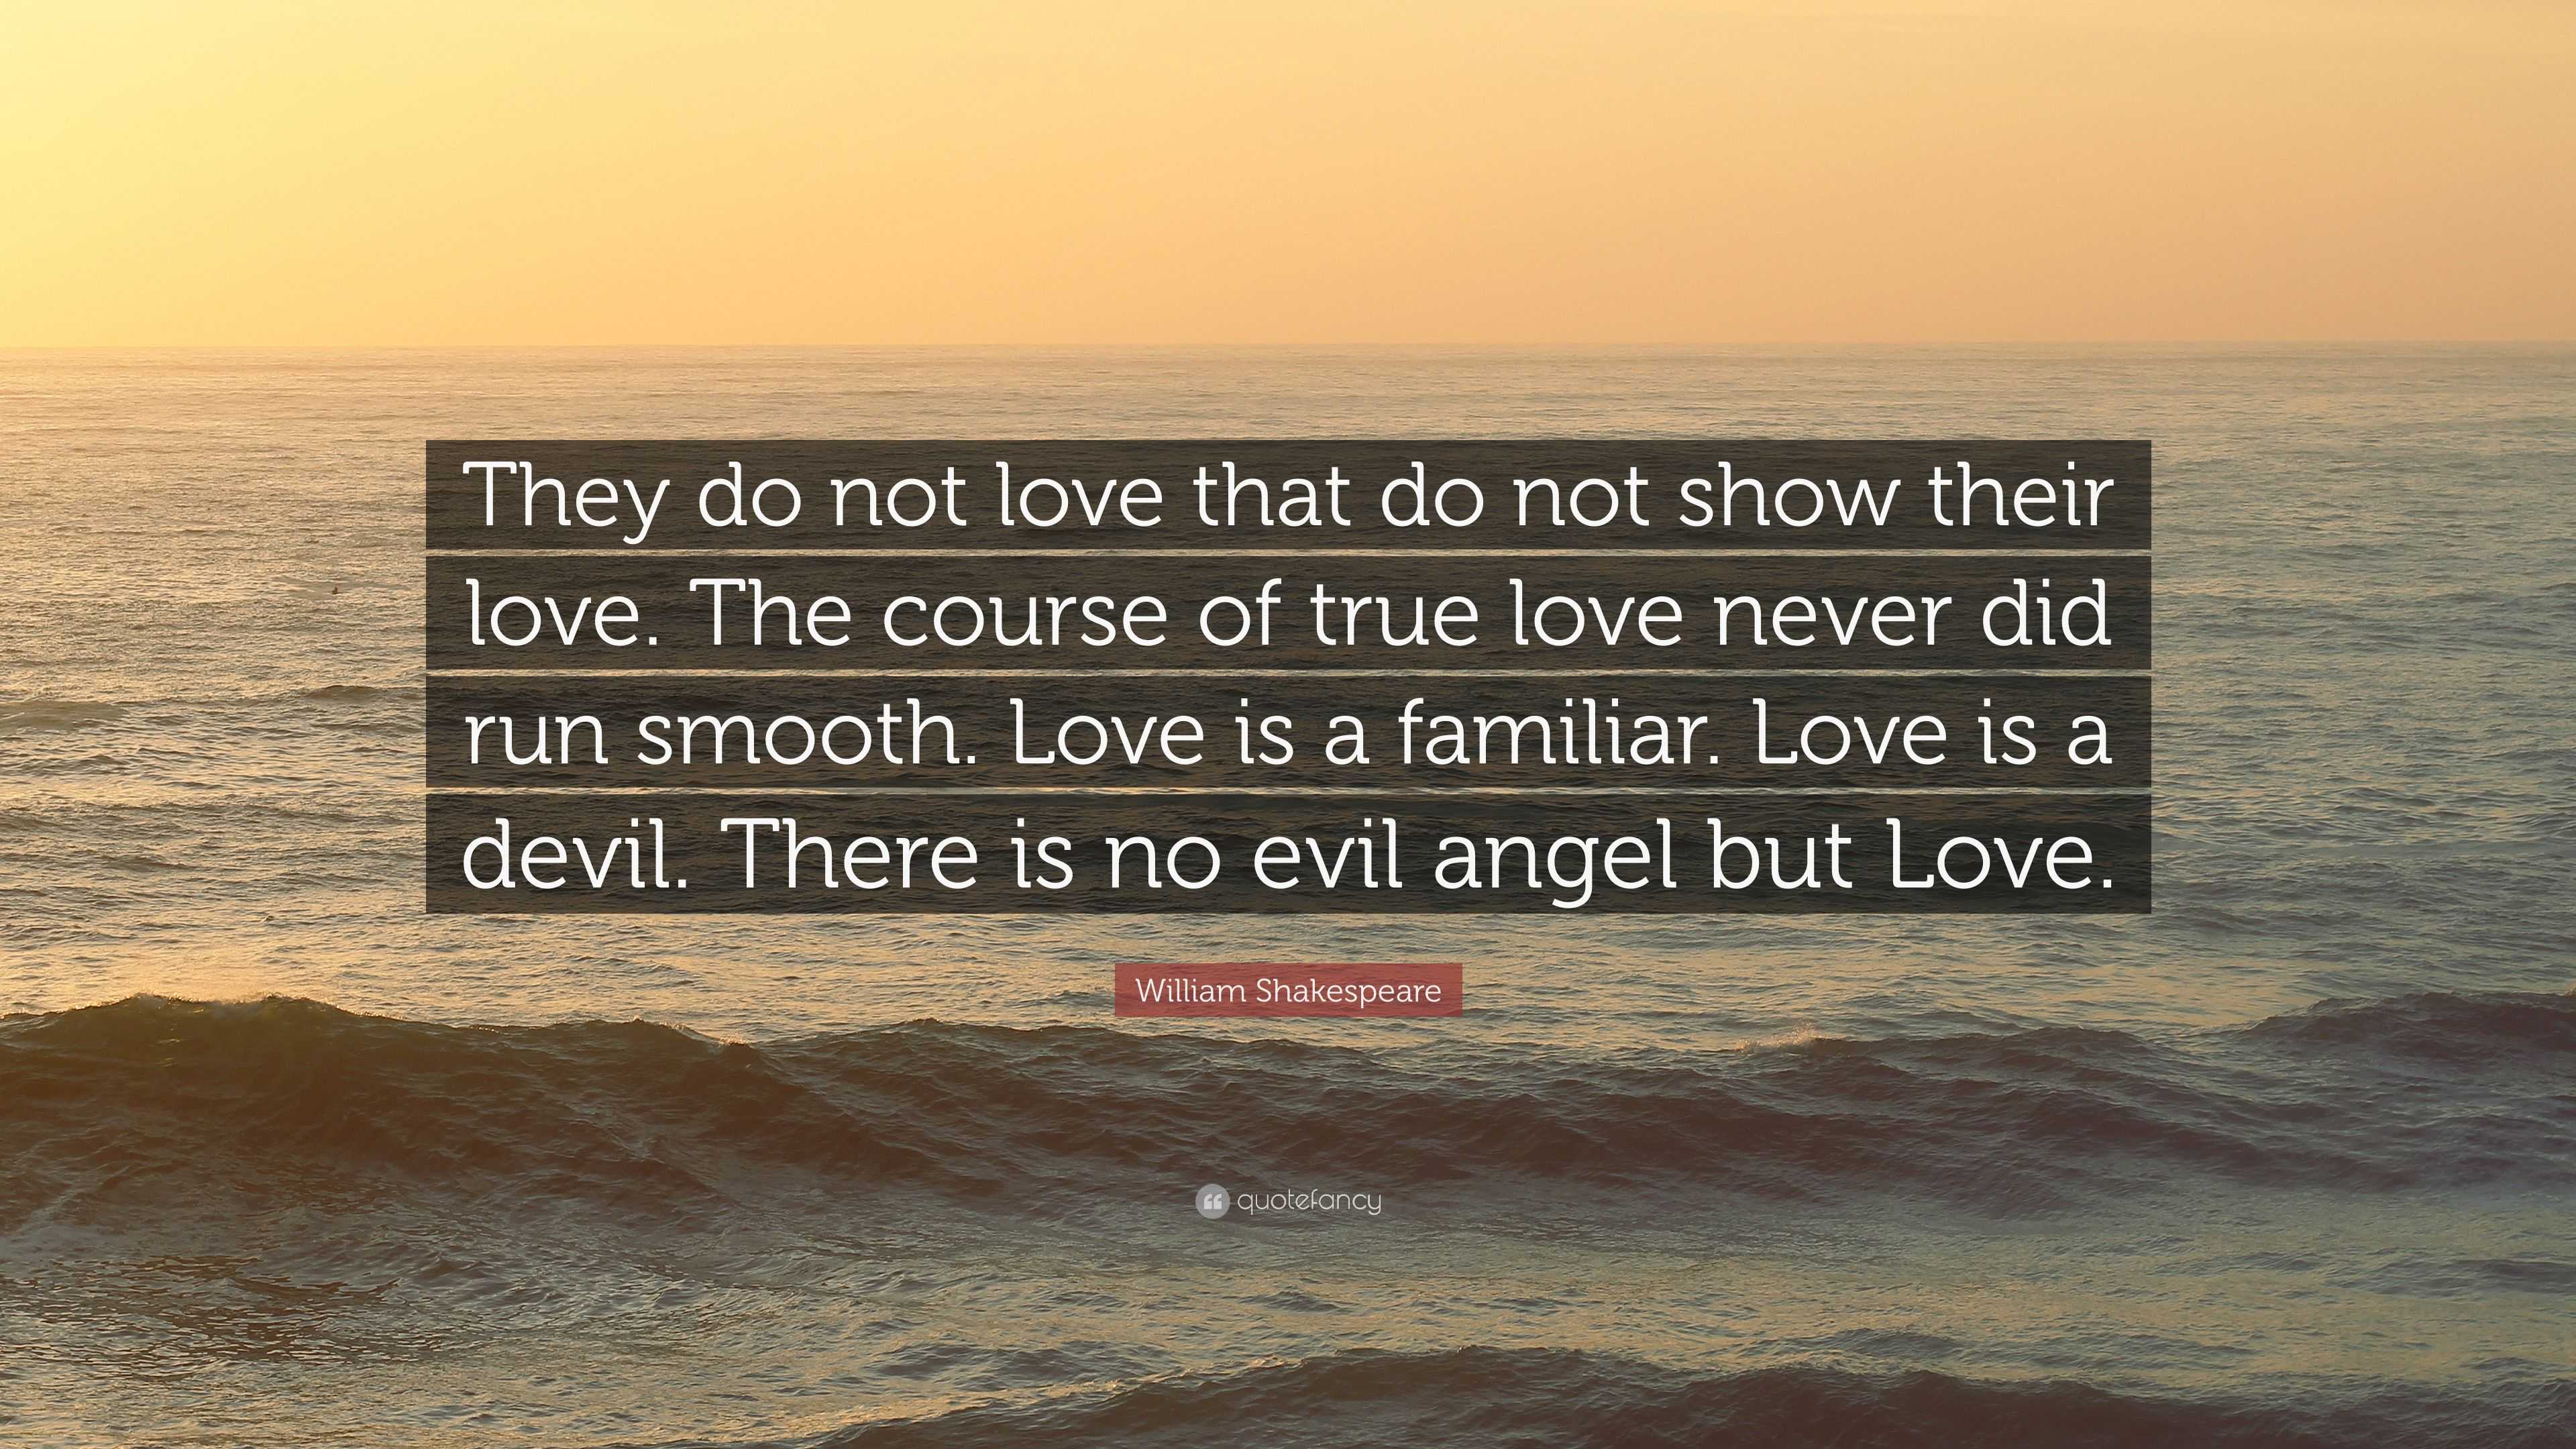 William Shakespeare Quote “They do not love that do not show their love